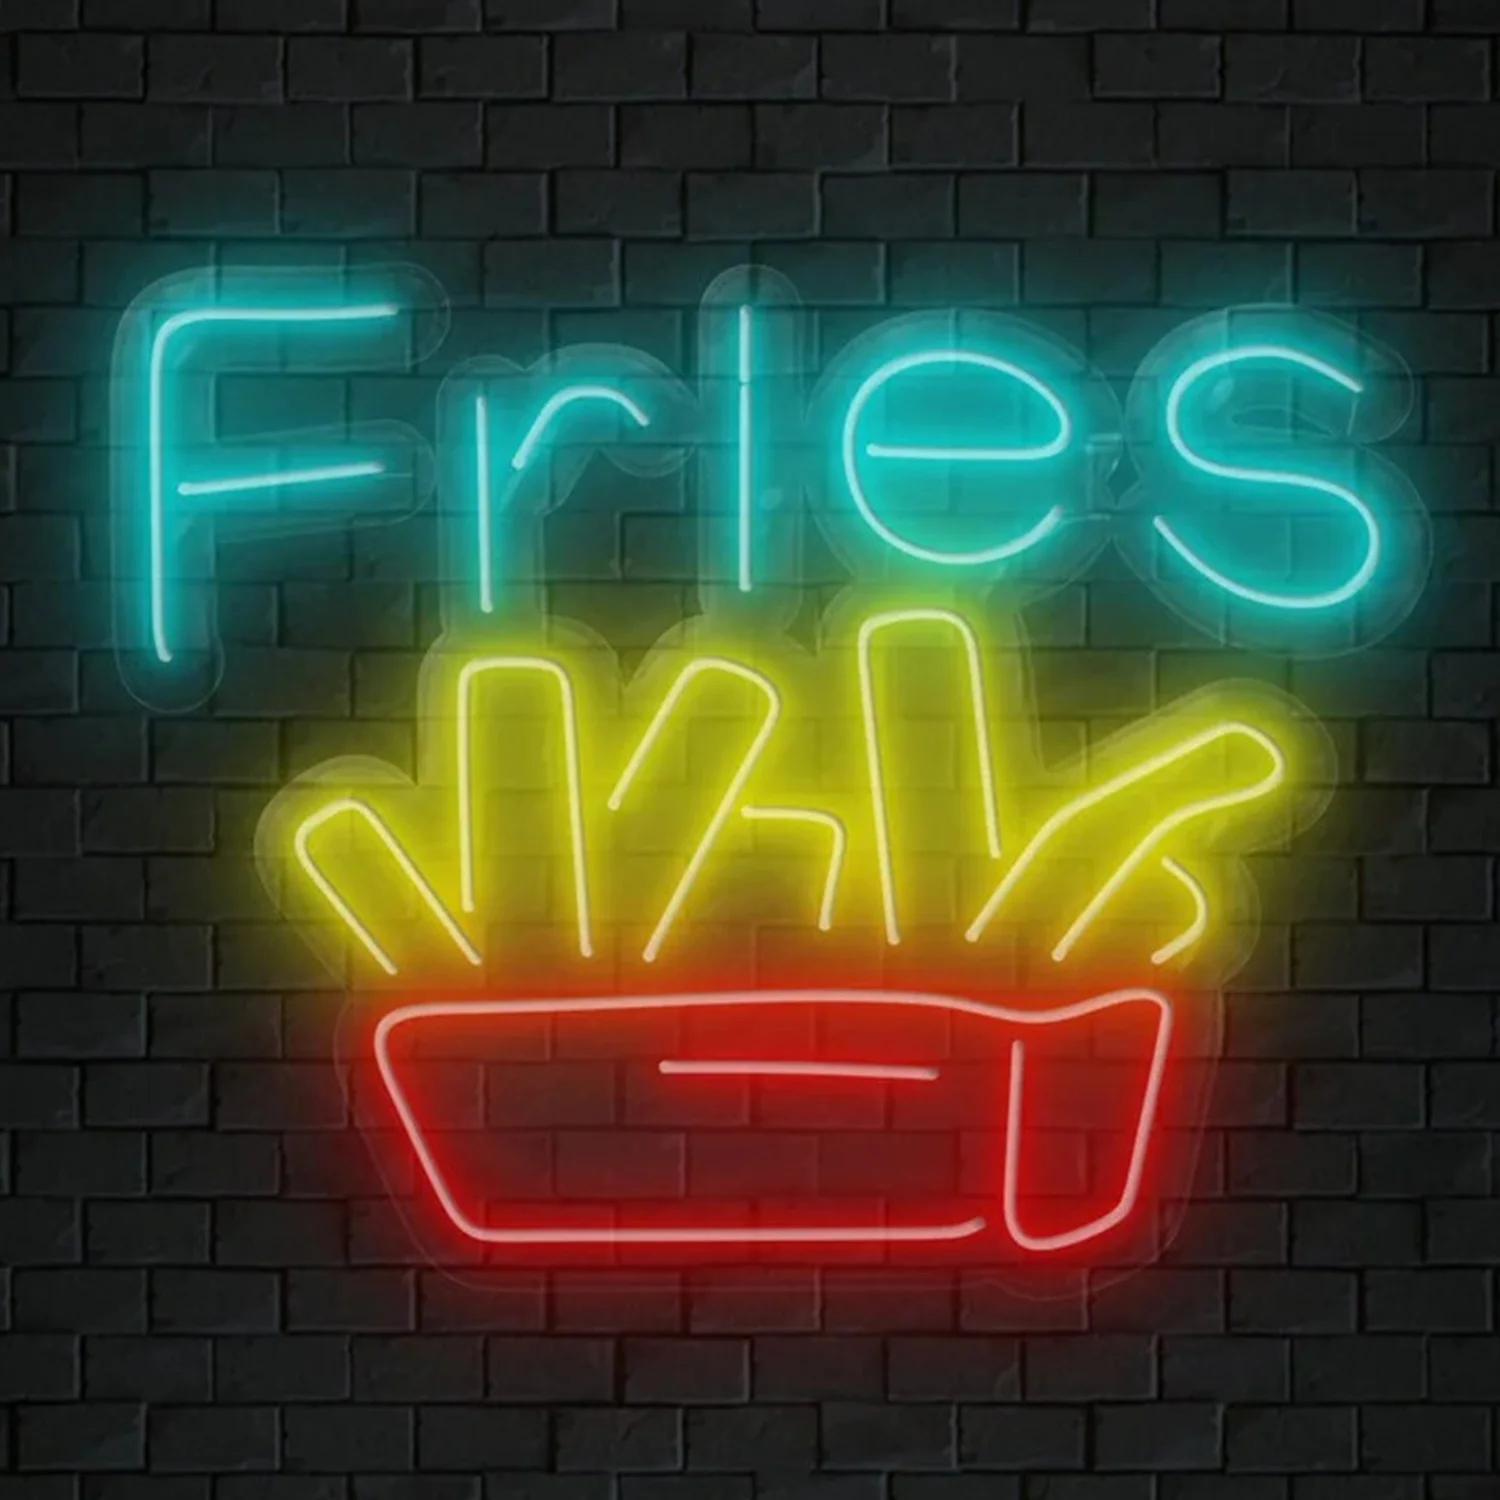 Fried French Fries Neon Signs Led Neon Sign Acrylic Light for Business Wall Art for Bedrooms Kitchen Dining Car Restaurant Party ineonlife neon sign led light chili tomato eggplant carrot acrylic wall bar party office room bedroom kitchen vegetable decorate